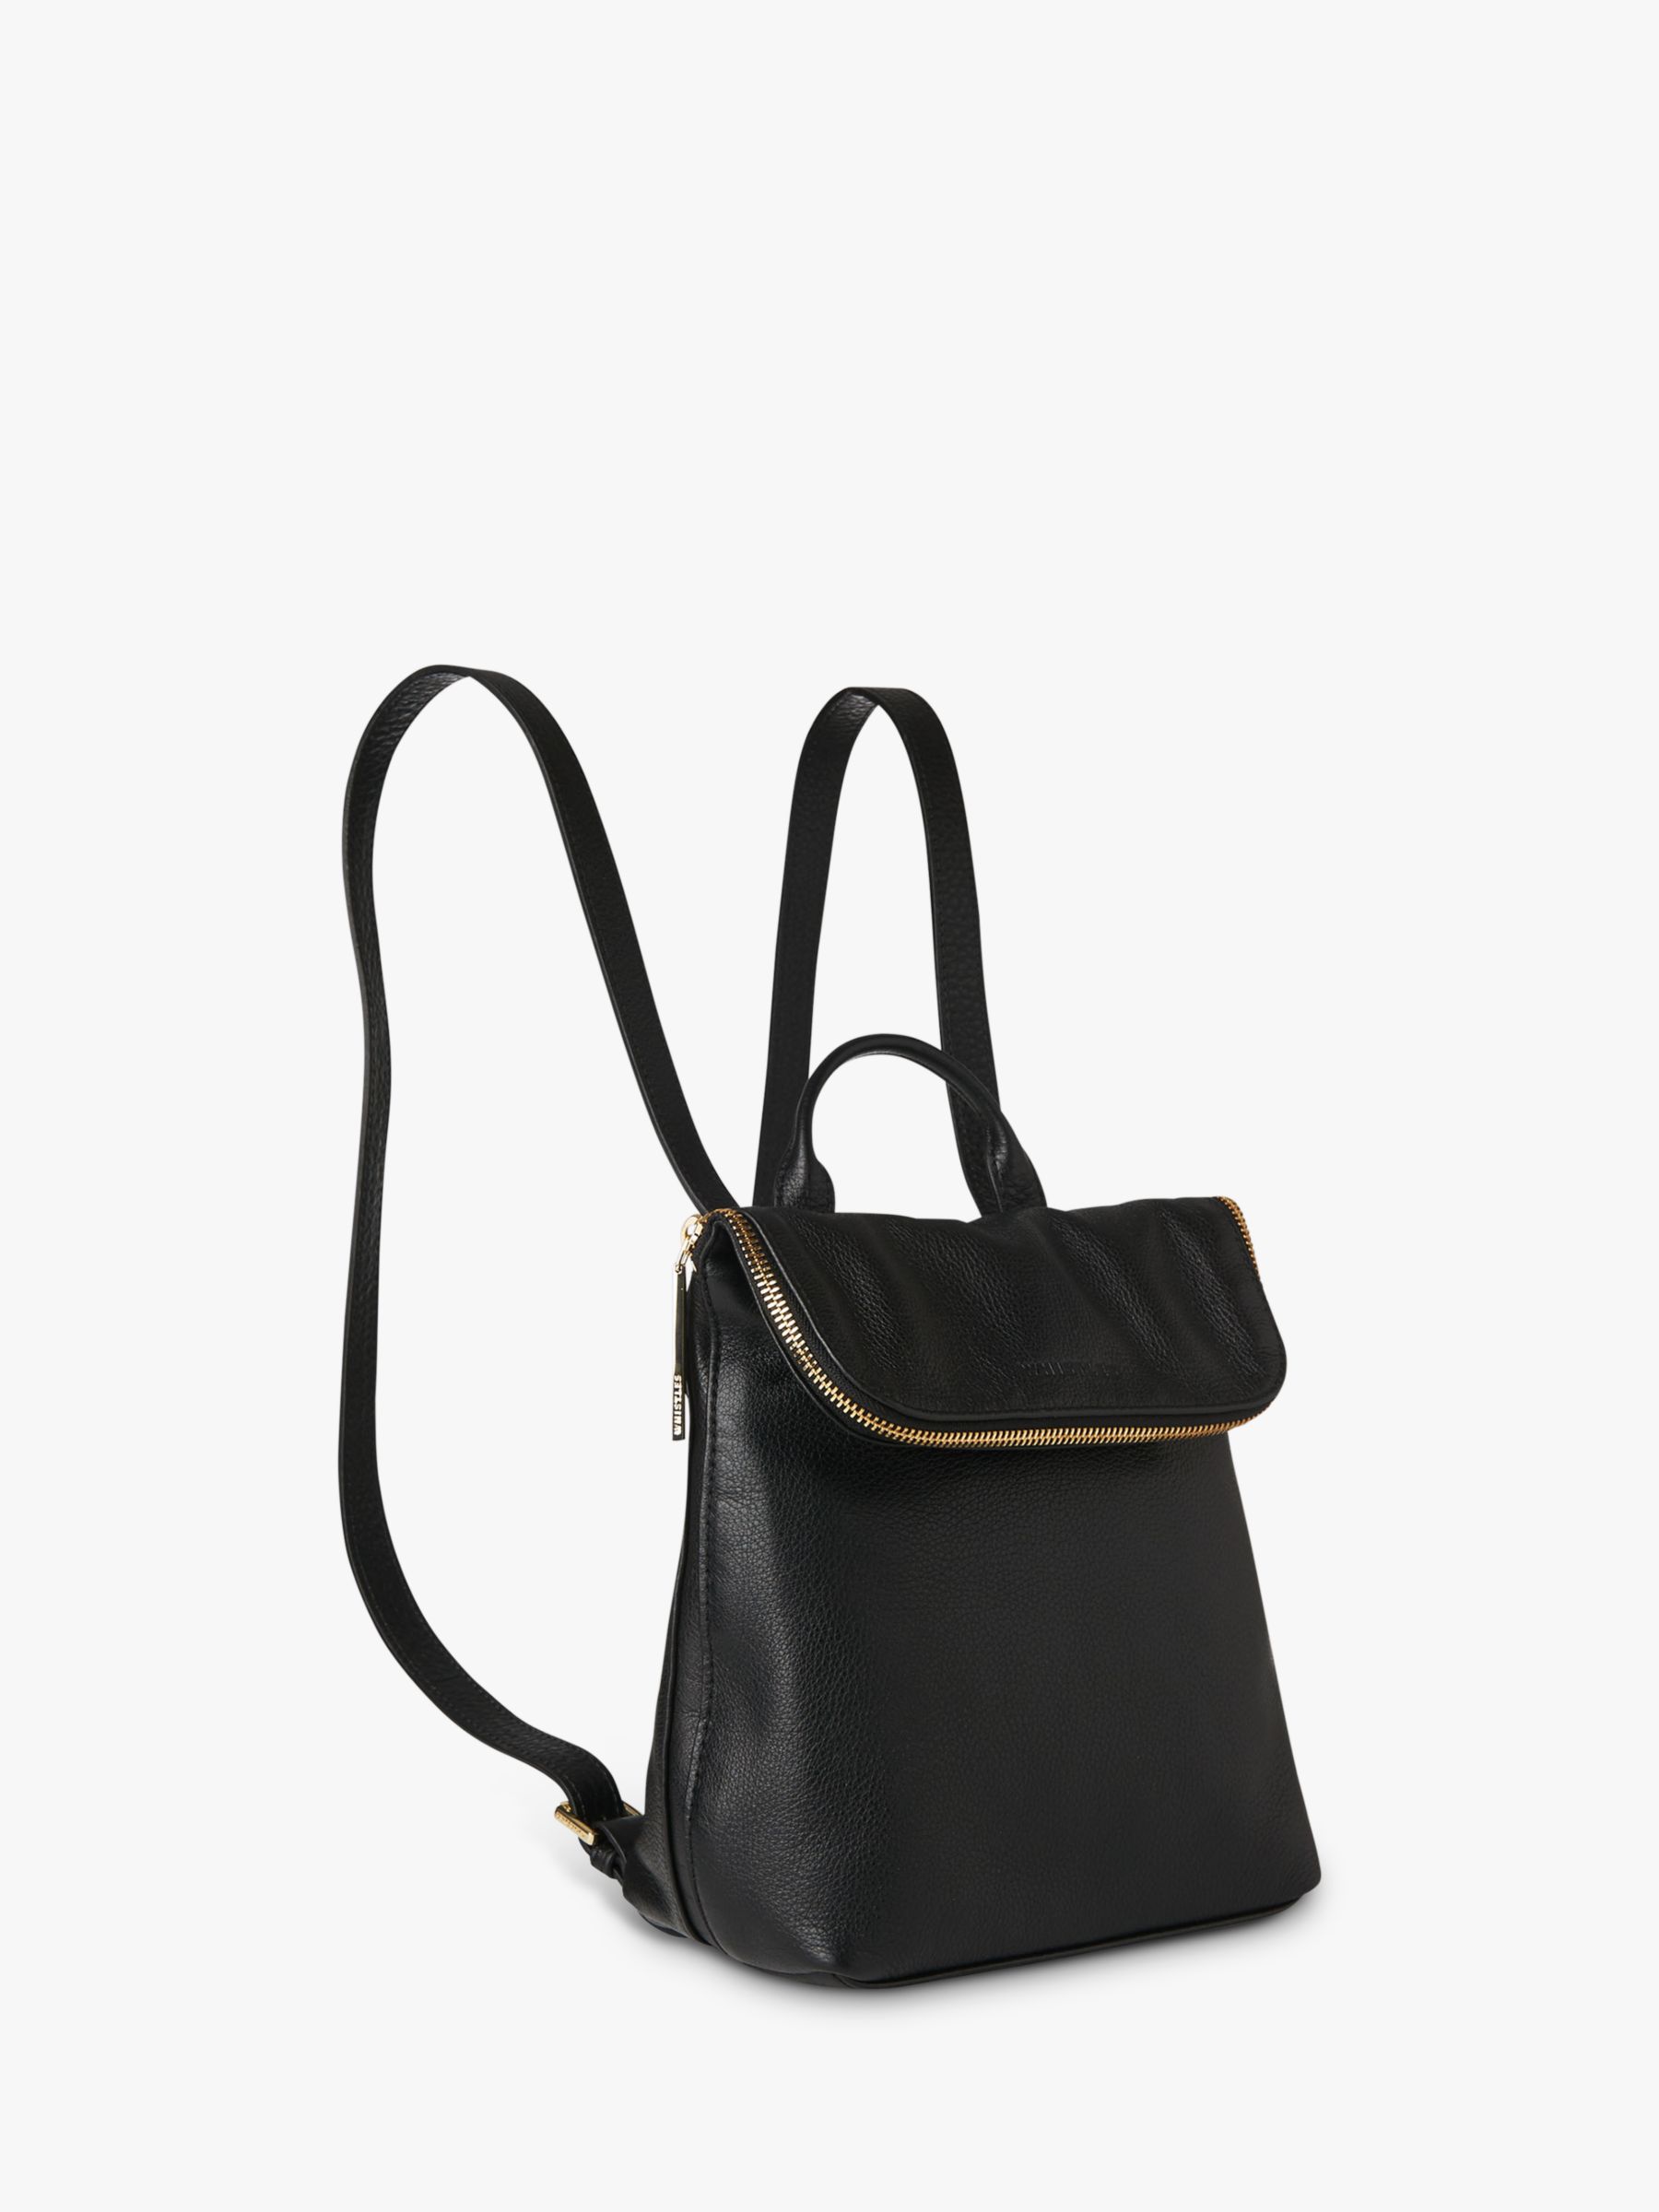 Buy Whistles Mini Verity Leather Backpack, Black Online at johnlewis.com